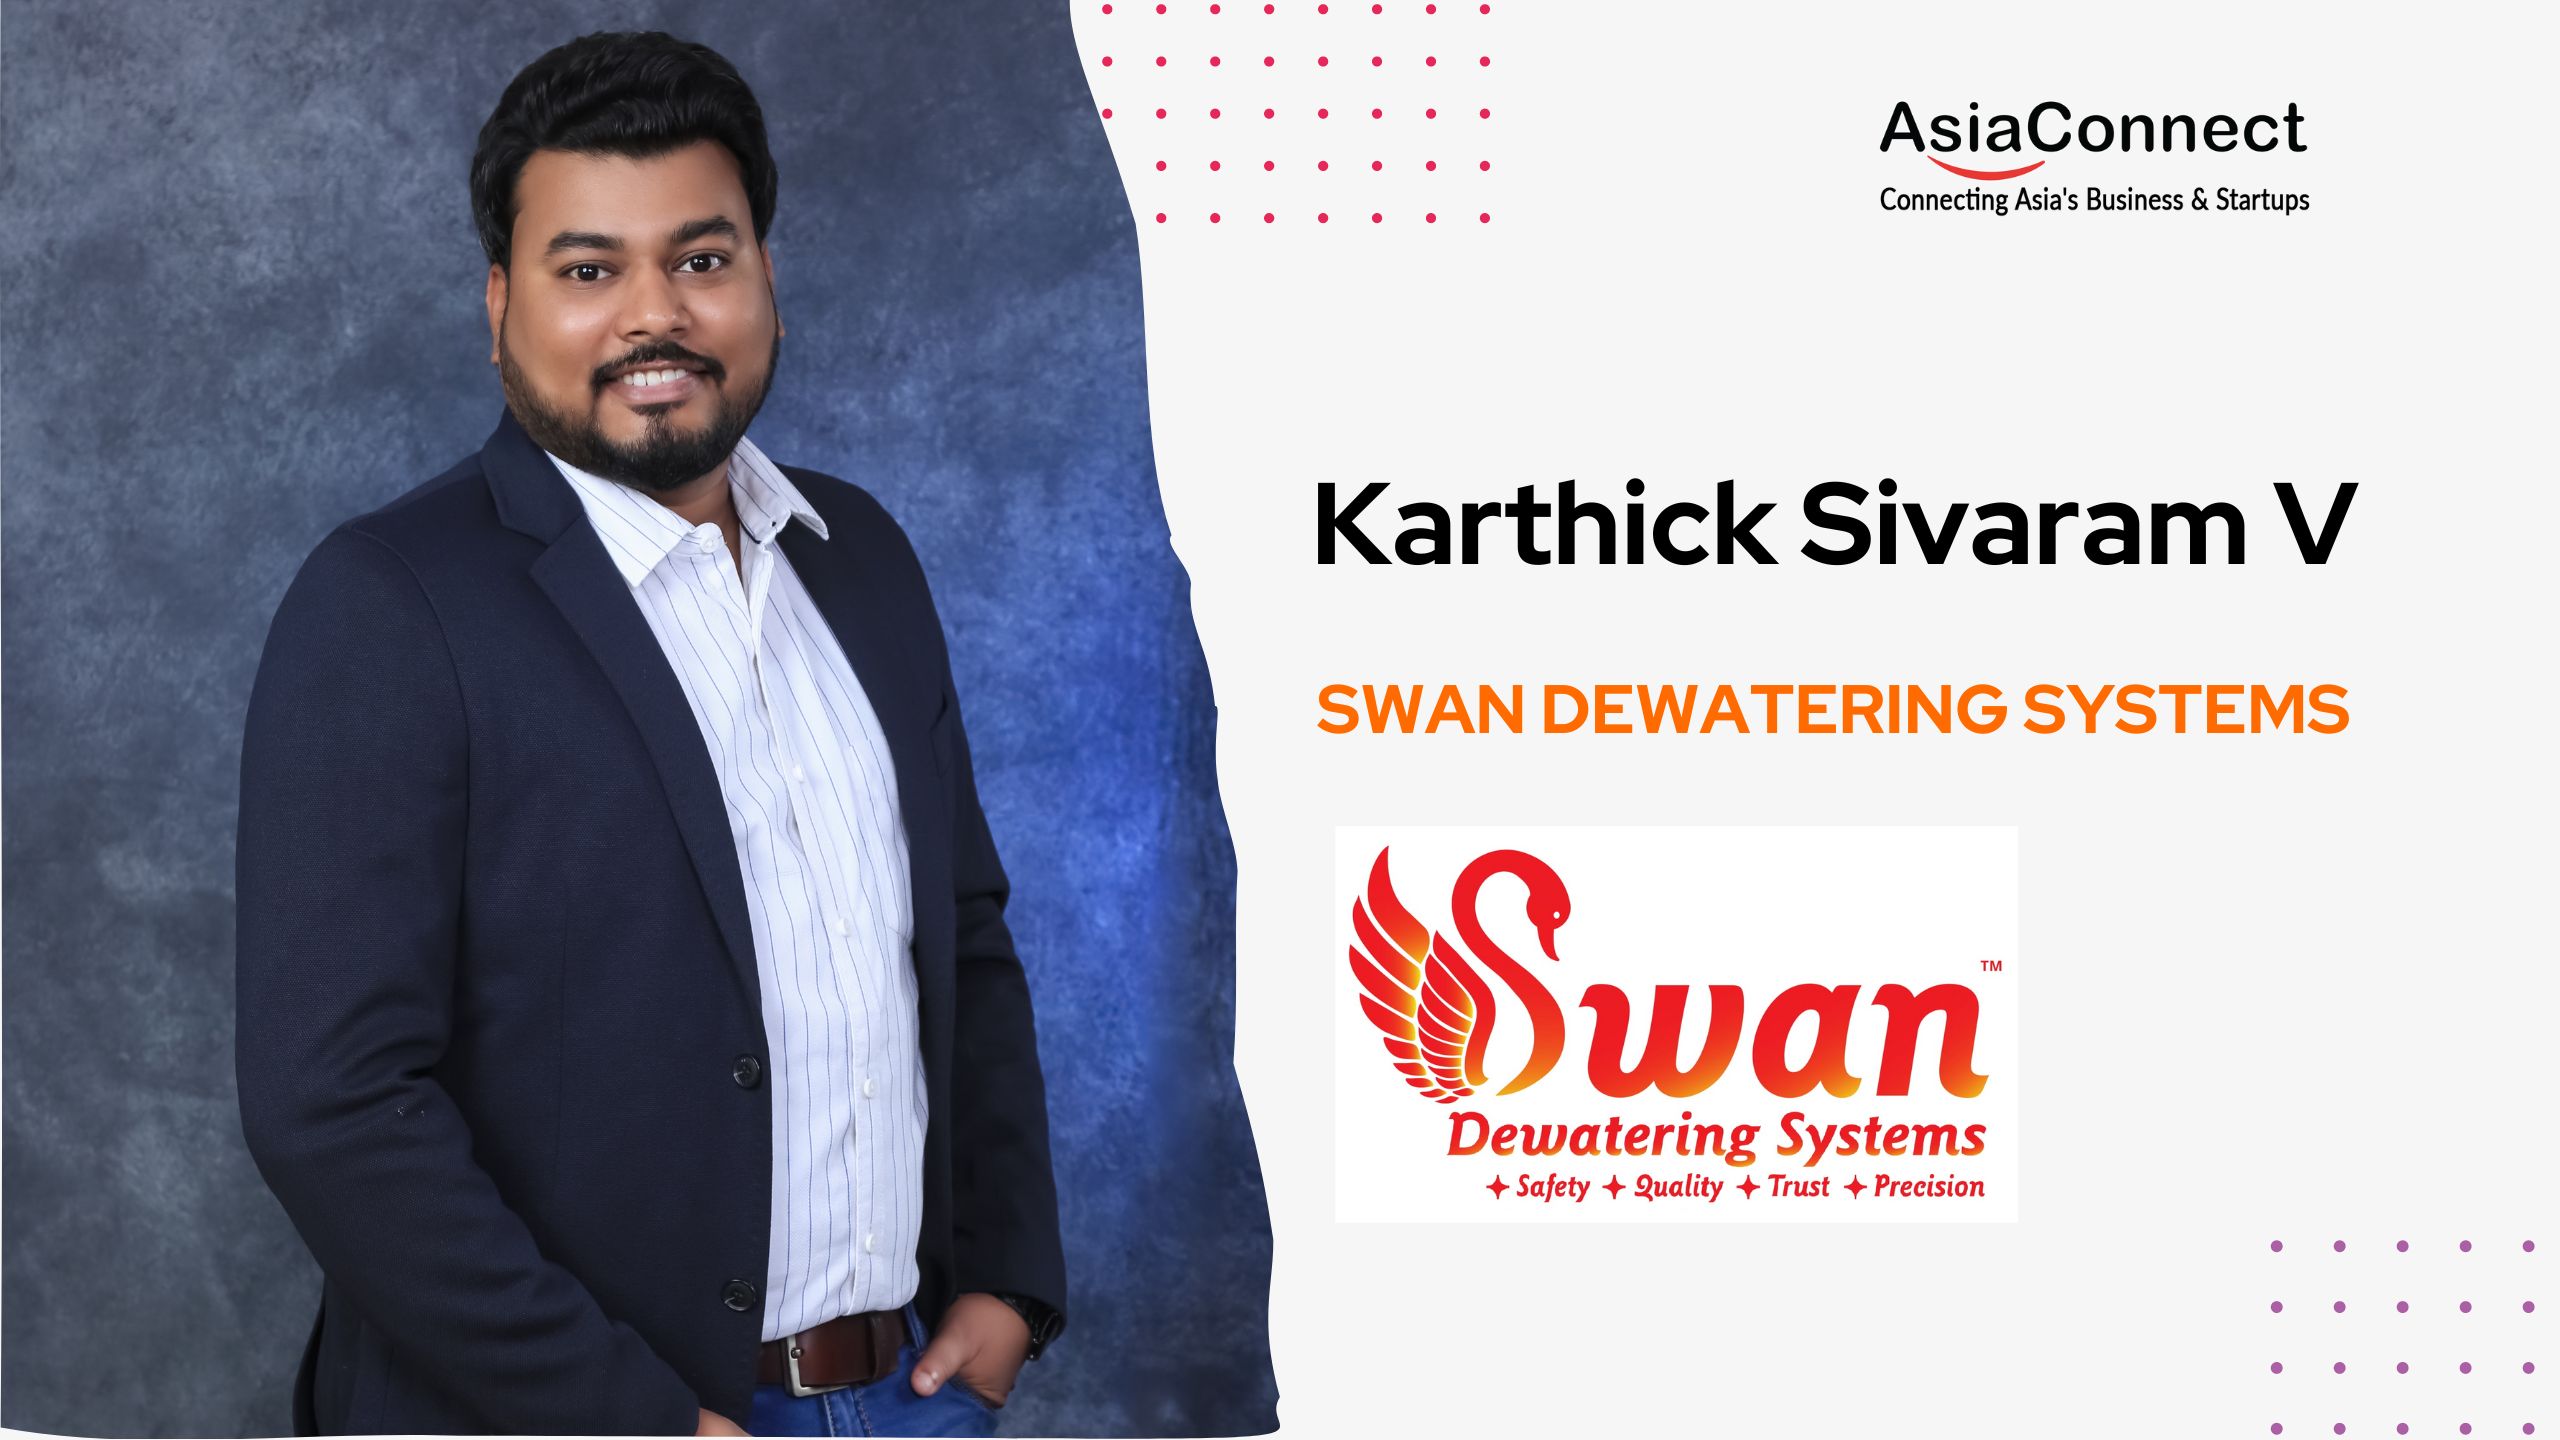 Swan Dewatering Systems: Redefining Excellence in Construction through Innovation and Commitment